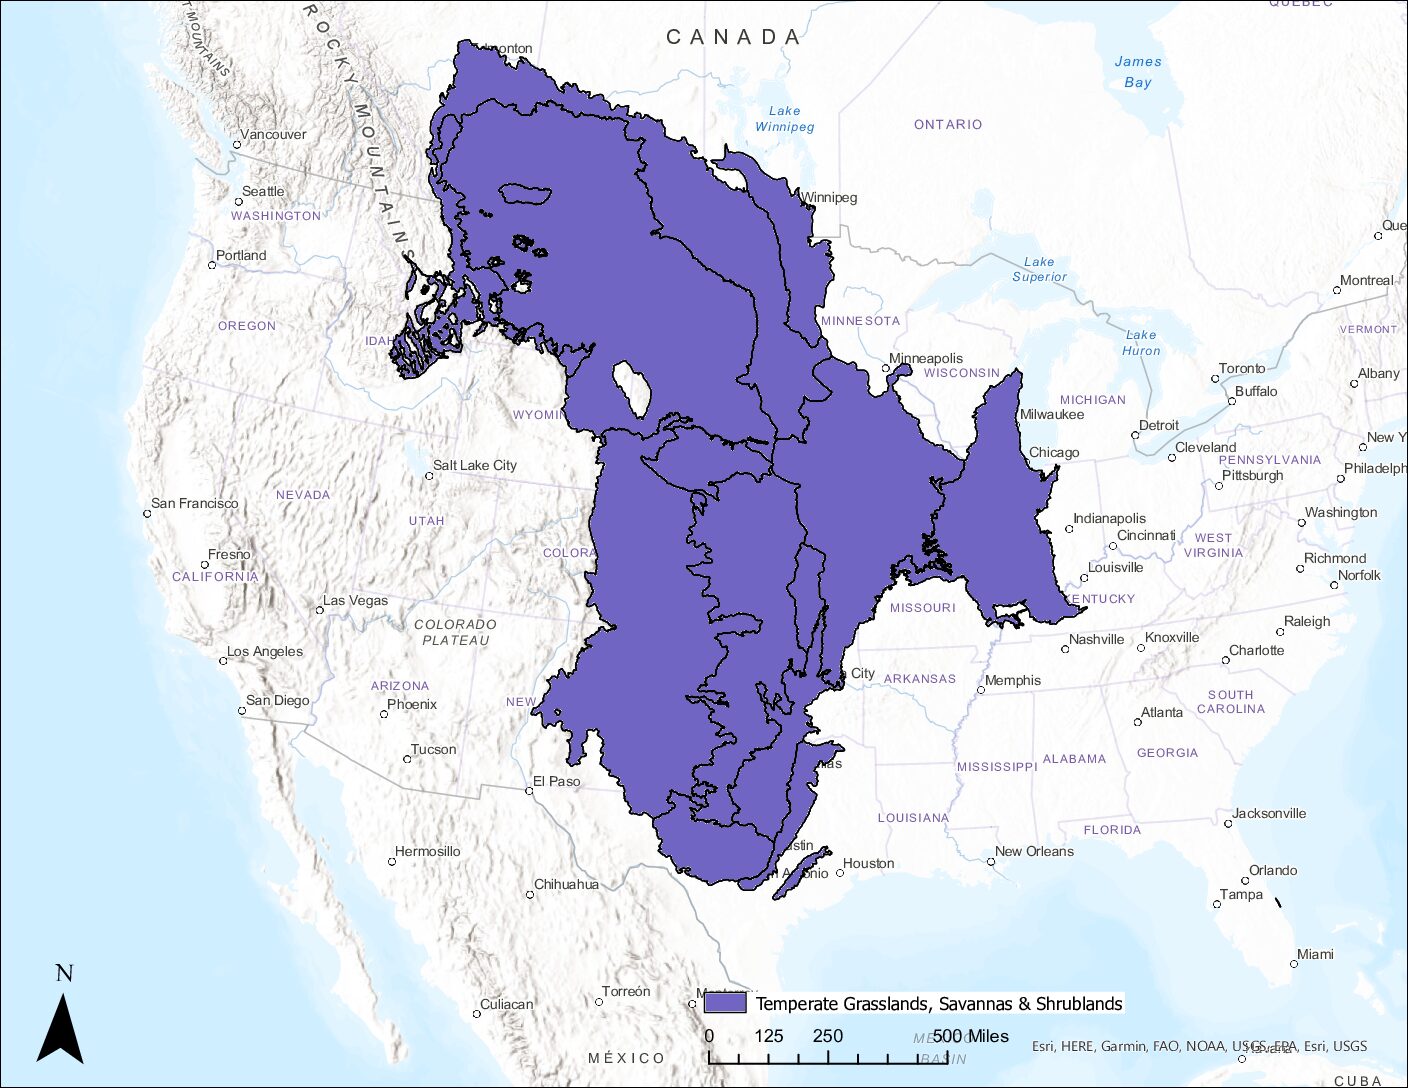 Map of the contiguous United States, northern Mexico, and southern Canada, with the region covered by prairie shaded purple. Prairie extends from southern Canada in the north to Texas in the south and from Idaho in the west to Wisconsin, Indiana, and Kentucky in the east.